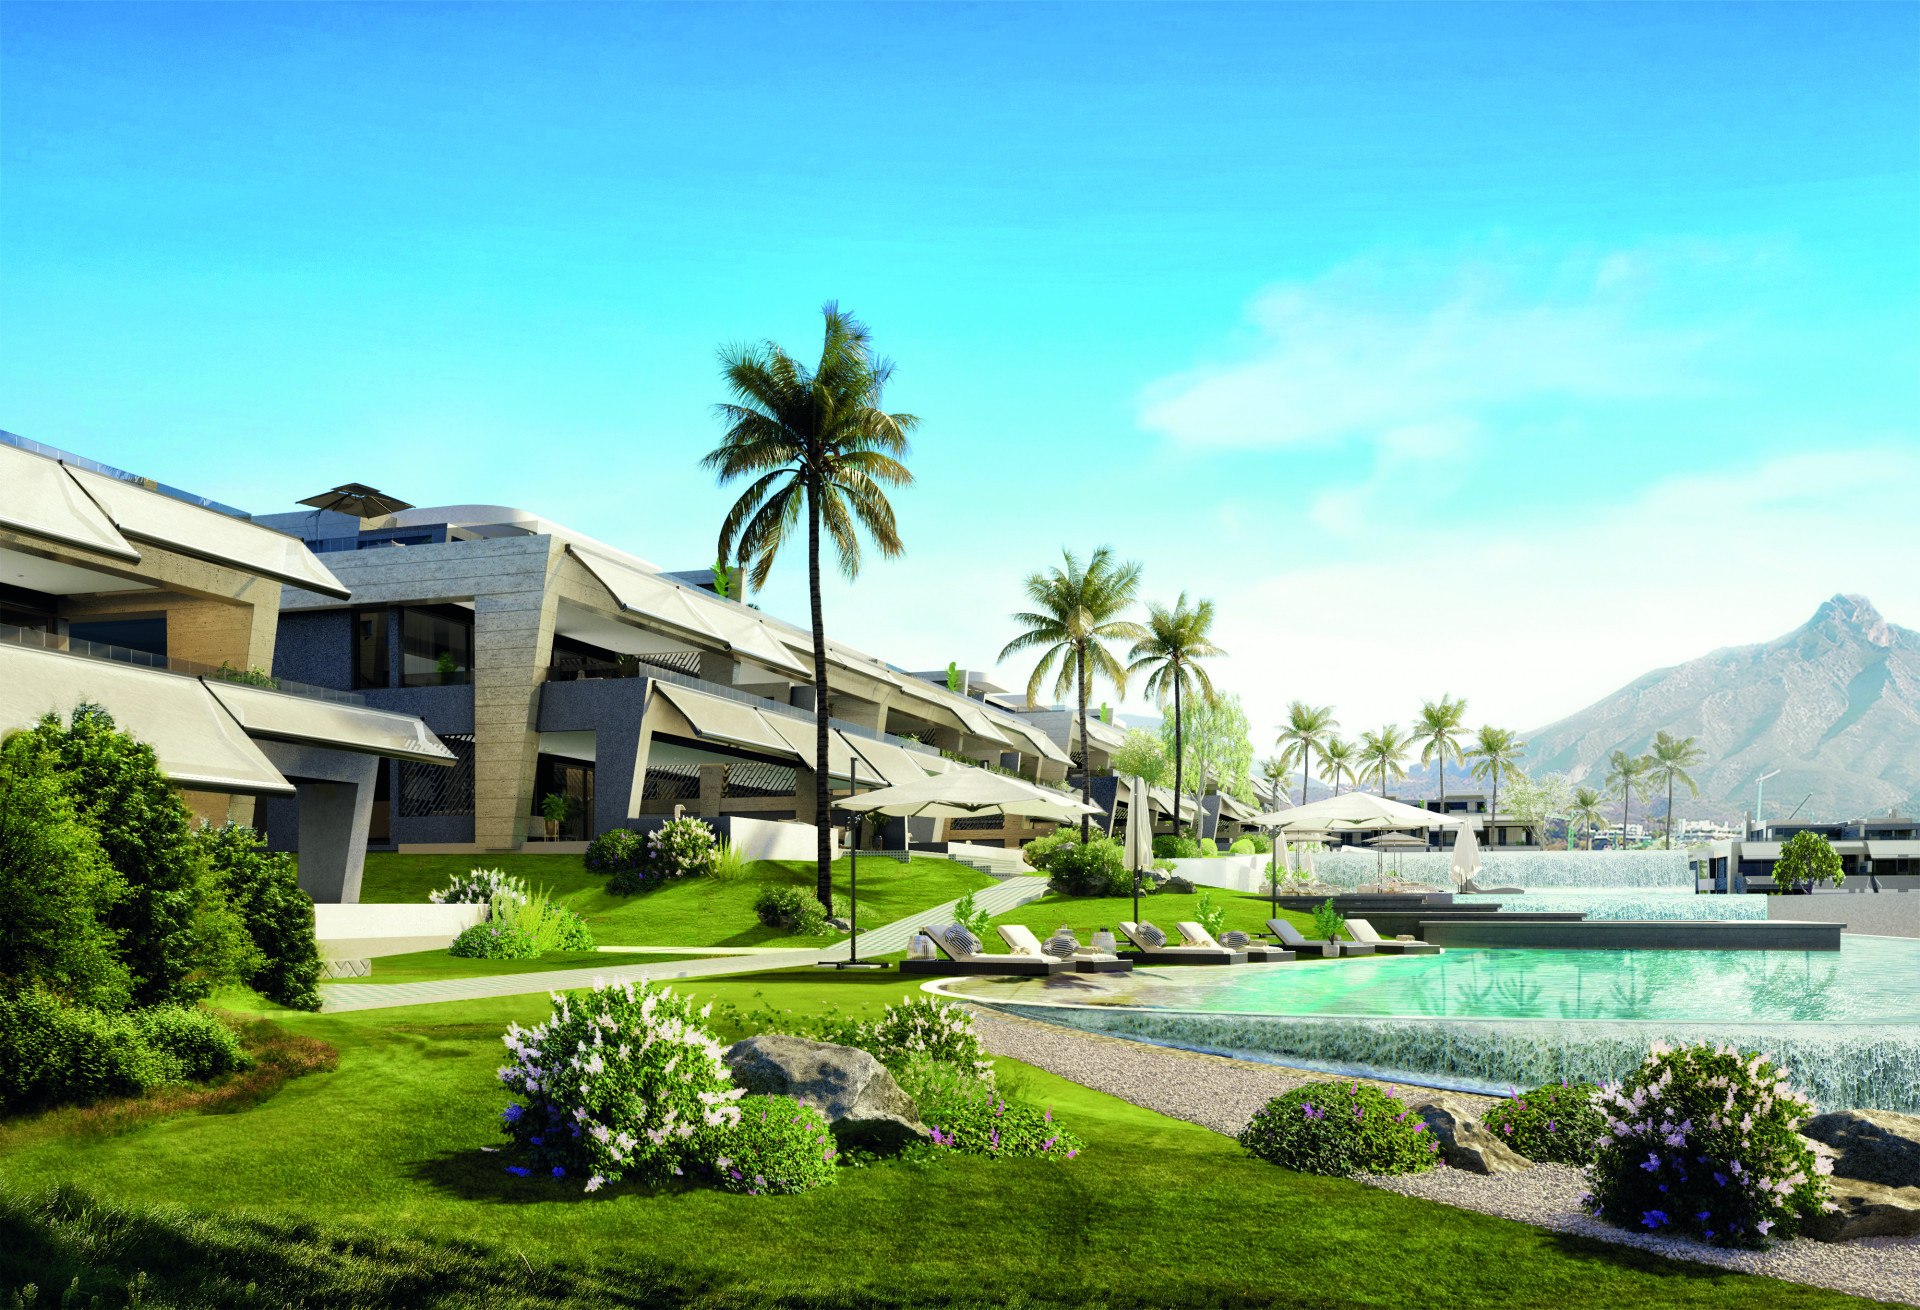 Epic Marbella: New private residential complex with luxury homes located in Marbella.